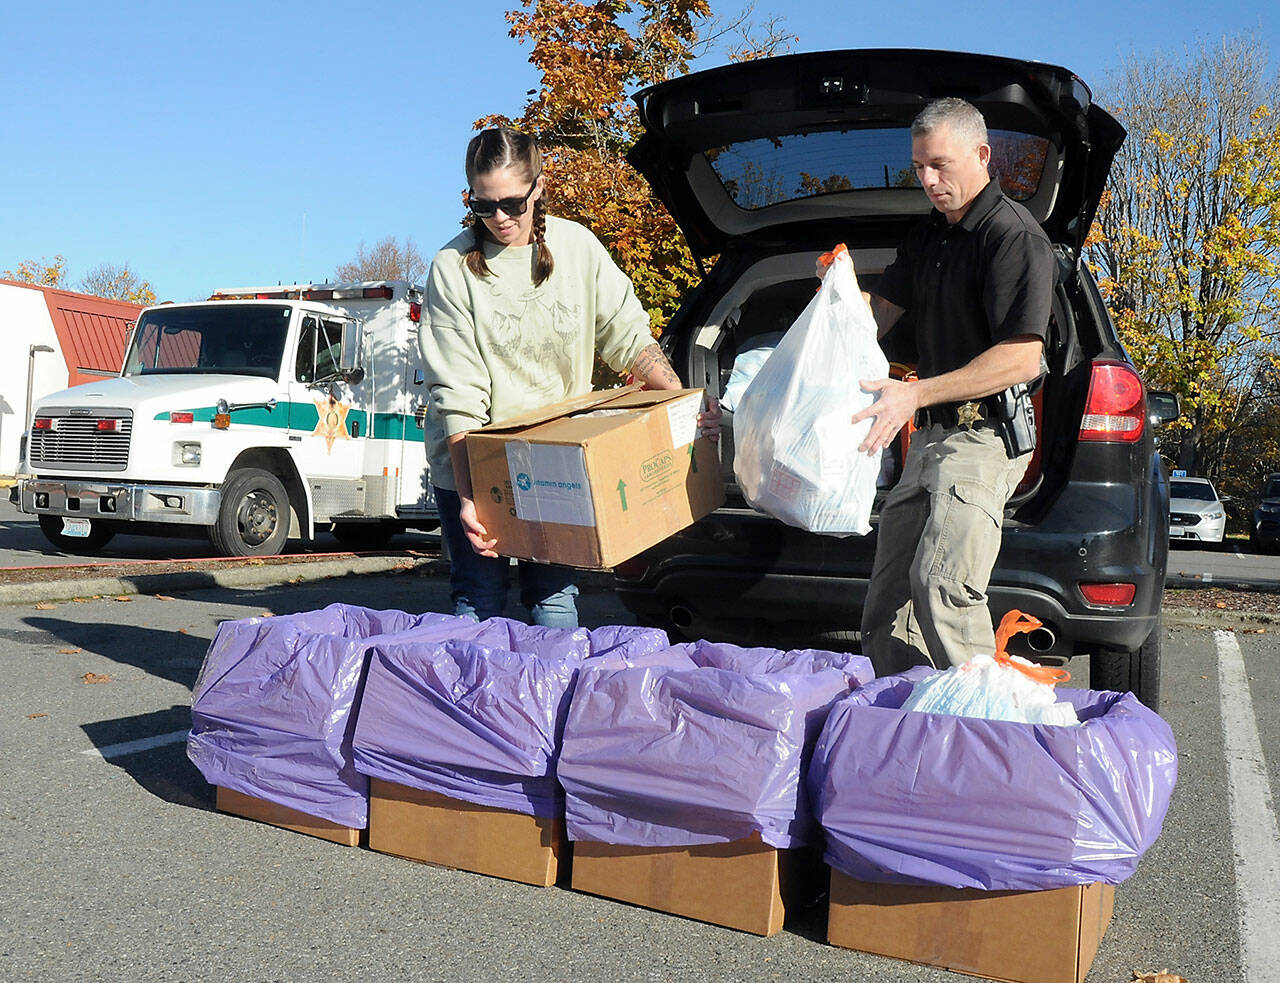 Photo by Keith Thorpe/Peninsula Daily News Group
Helen Kenoyer of the Olympic Peninsula Community Clinic and Inspector Josh Ley of the Clallam County Sheriffs Office unload unwanted pharmaceuticals and medications from the agency at a drop-off point at the Clallam County Courthouse during the National Prescription Drug Take Back Day on Oct. 28. At the event, people were allowed to get rid of unwanted or expired drugs for disposal in a safe and responsible manner. Additional drop-off points on Saturday were at Sequim City Hall and the QFC grocery store in Port Hadlock. Year-round drug disposal sites are kiosks at the Clallam County Sheriff’s Office in Port Angeles, at the Sequim Police Department and through the Jefferson County Sheriff’s Office in Port Hadlock.